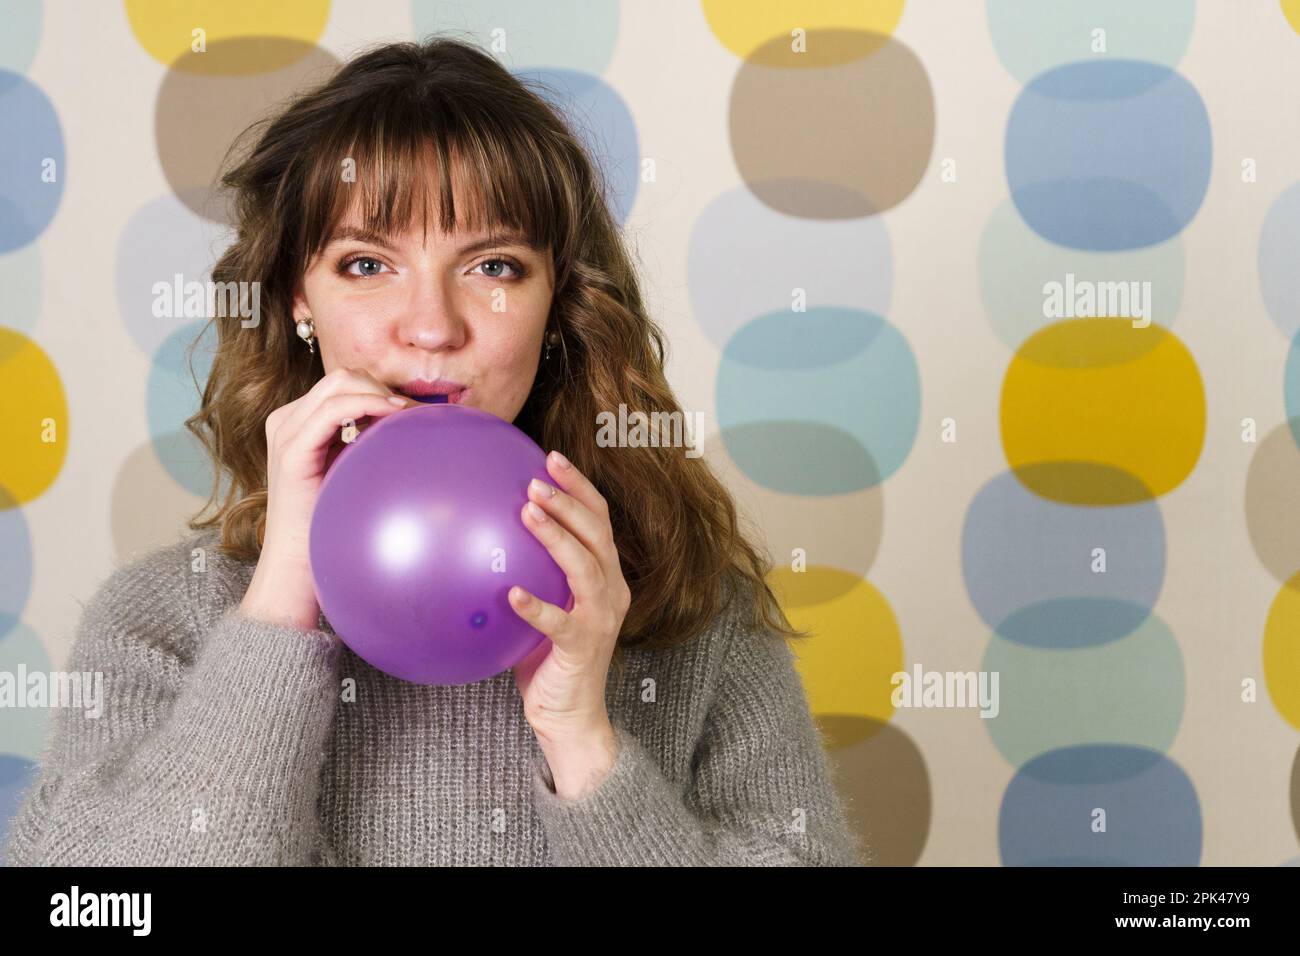 Young Woman Blowing a Purple Balloon Stock Photo